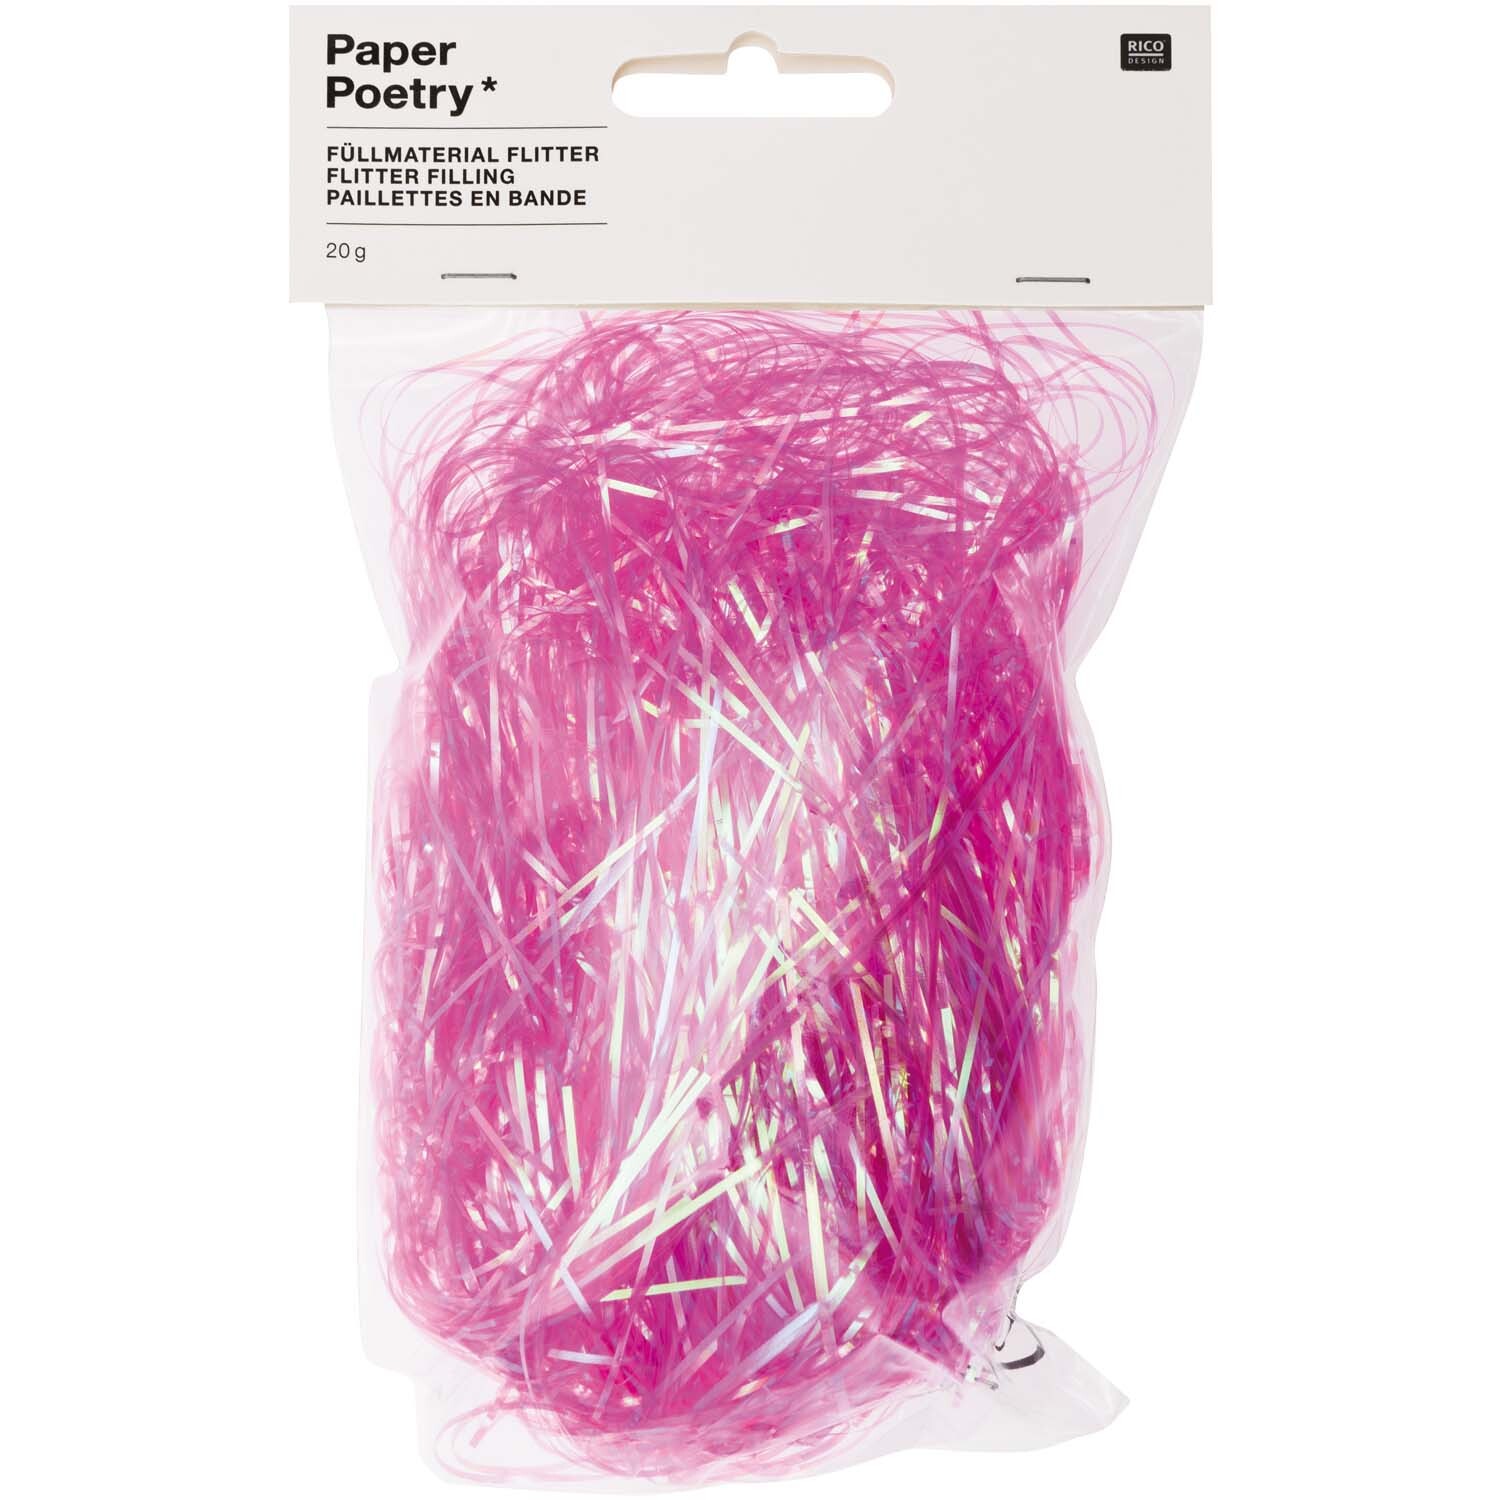 Paper Poetry Füllmaterial Flitter 20g